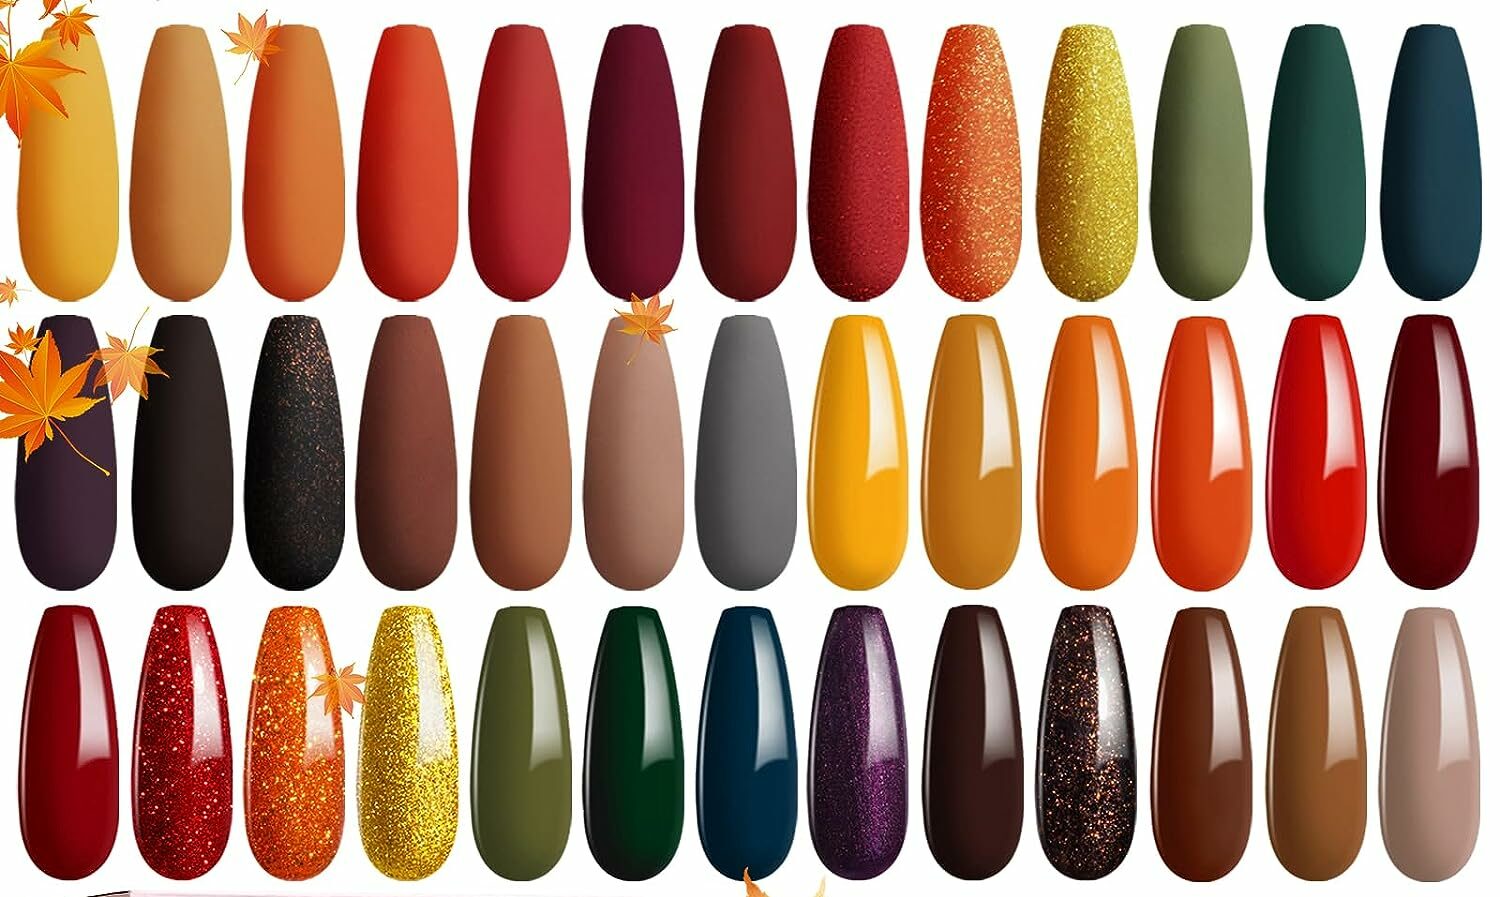 10. "Must-Have Nail Colors for a Summer Wedding" - wide 3